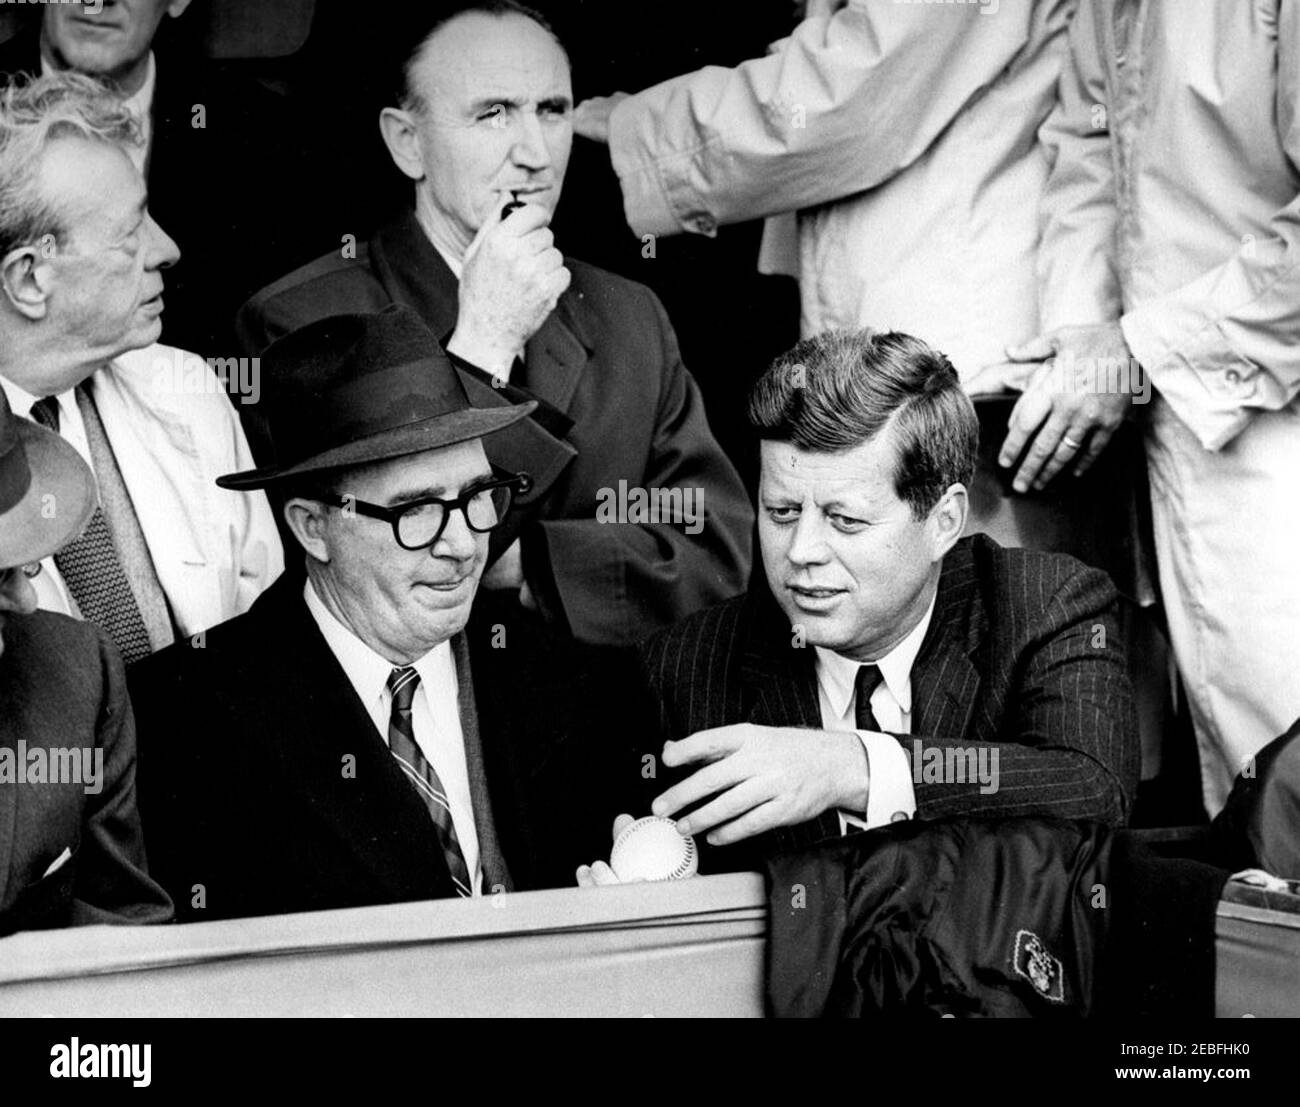 Opening Day of the 1961 Baseball Season, 1:10PM. President John F. Kennedy and Special Assistant to the President Dave Powers look at a baseball during the opening game of the 1961 baseball season at Griffith Stadium, Washington, D.C. Also pictured are Senate Minority Leader Everett Dirksen of Illinois (behind Powers) and Senate Majority Leader Mike Mansfield of Montana (behind President Kennedy). Stock Photo